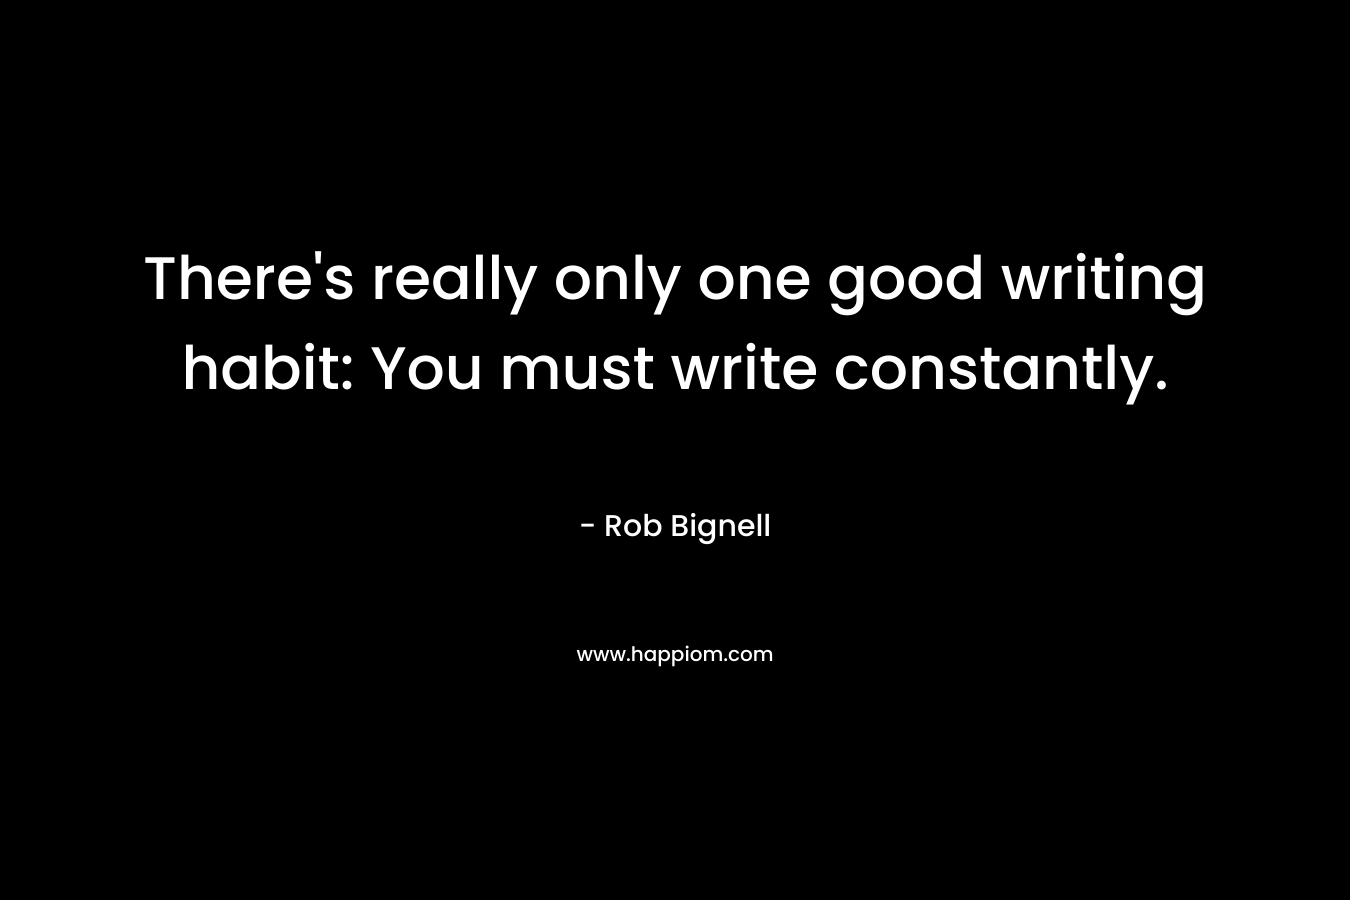 There’s really only one good writing habit: You must write constantly. – Rob Bignell